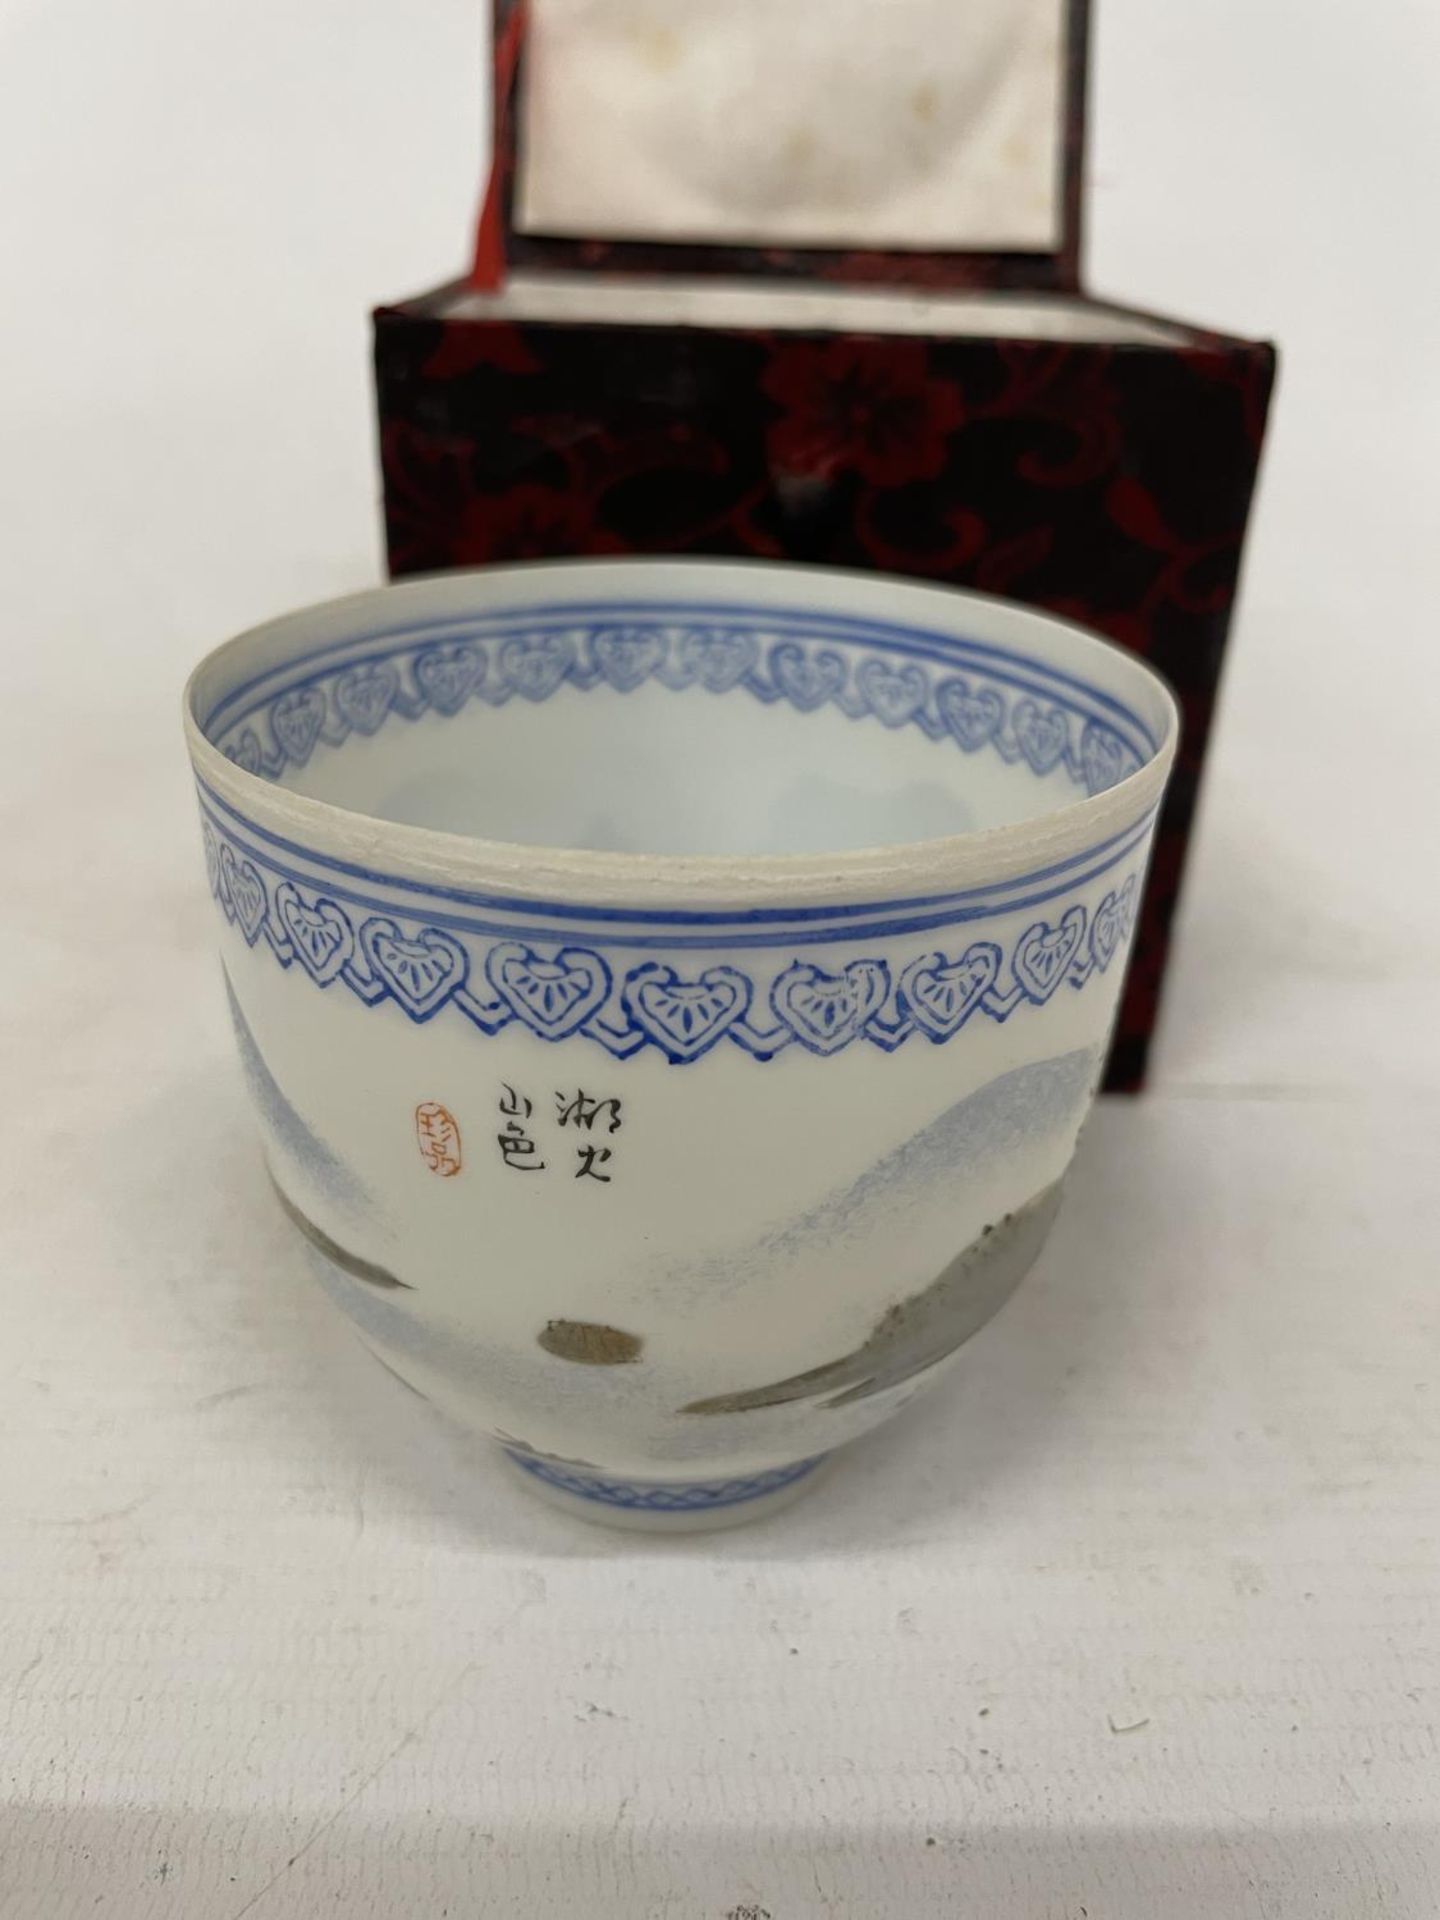 A CHINESE EGGSHELL PAPER THIN PORCELAIN HAND PAINTED CUP WITH POLYCHROME LANDSCAPE DECORATION - Image 3 of 4